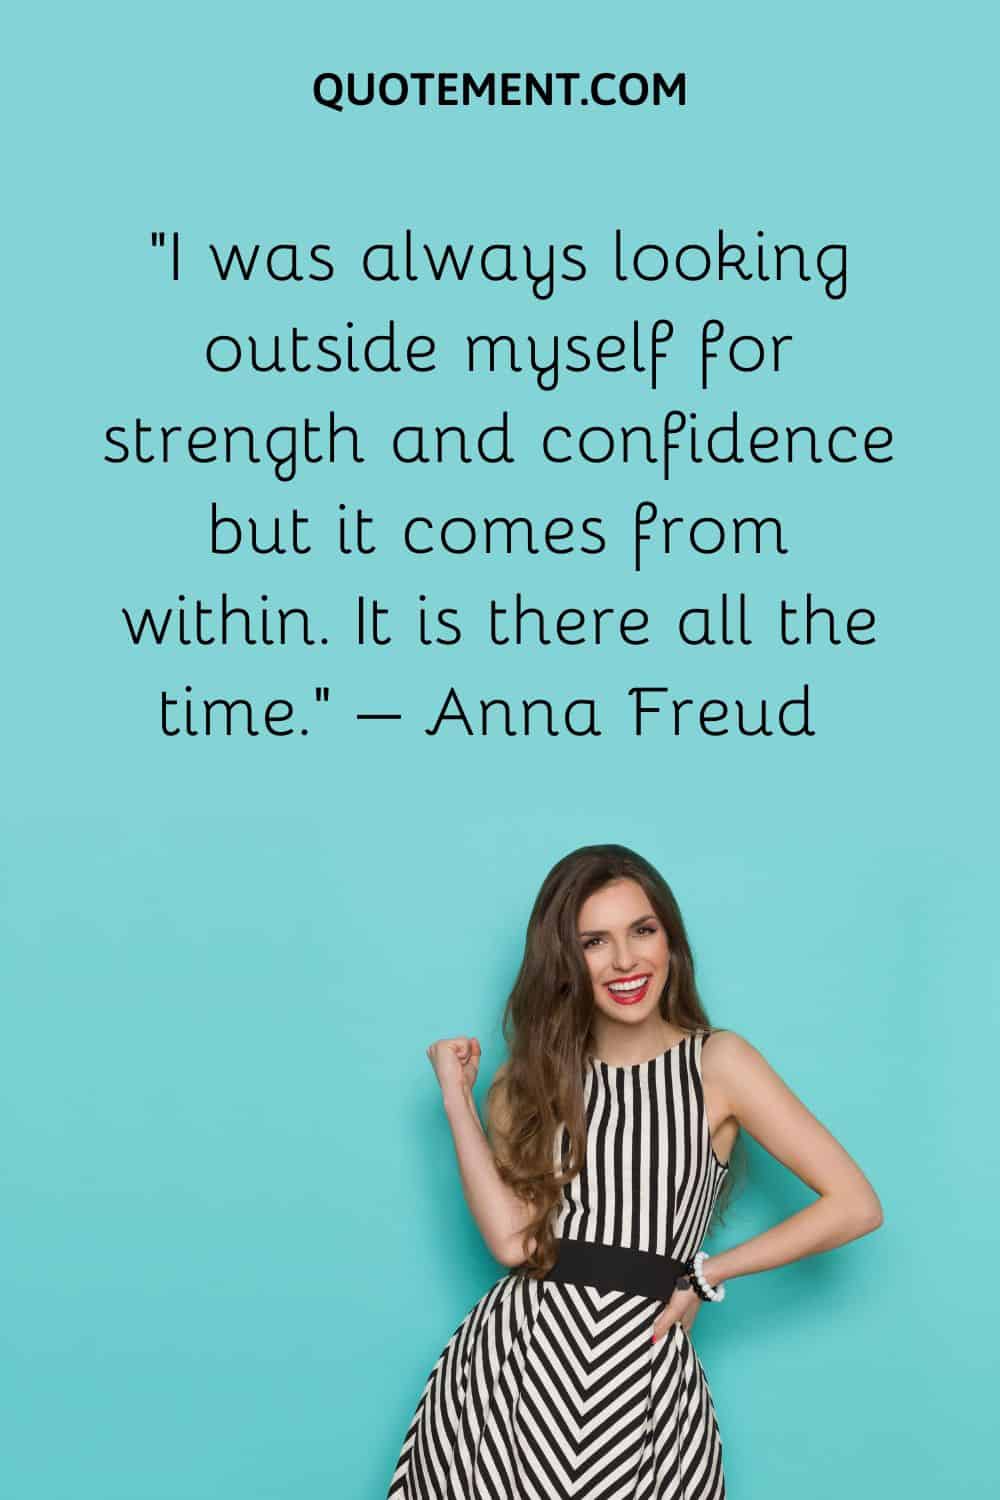 I was always looking outside myself for strength and confidence but it comes from within